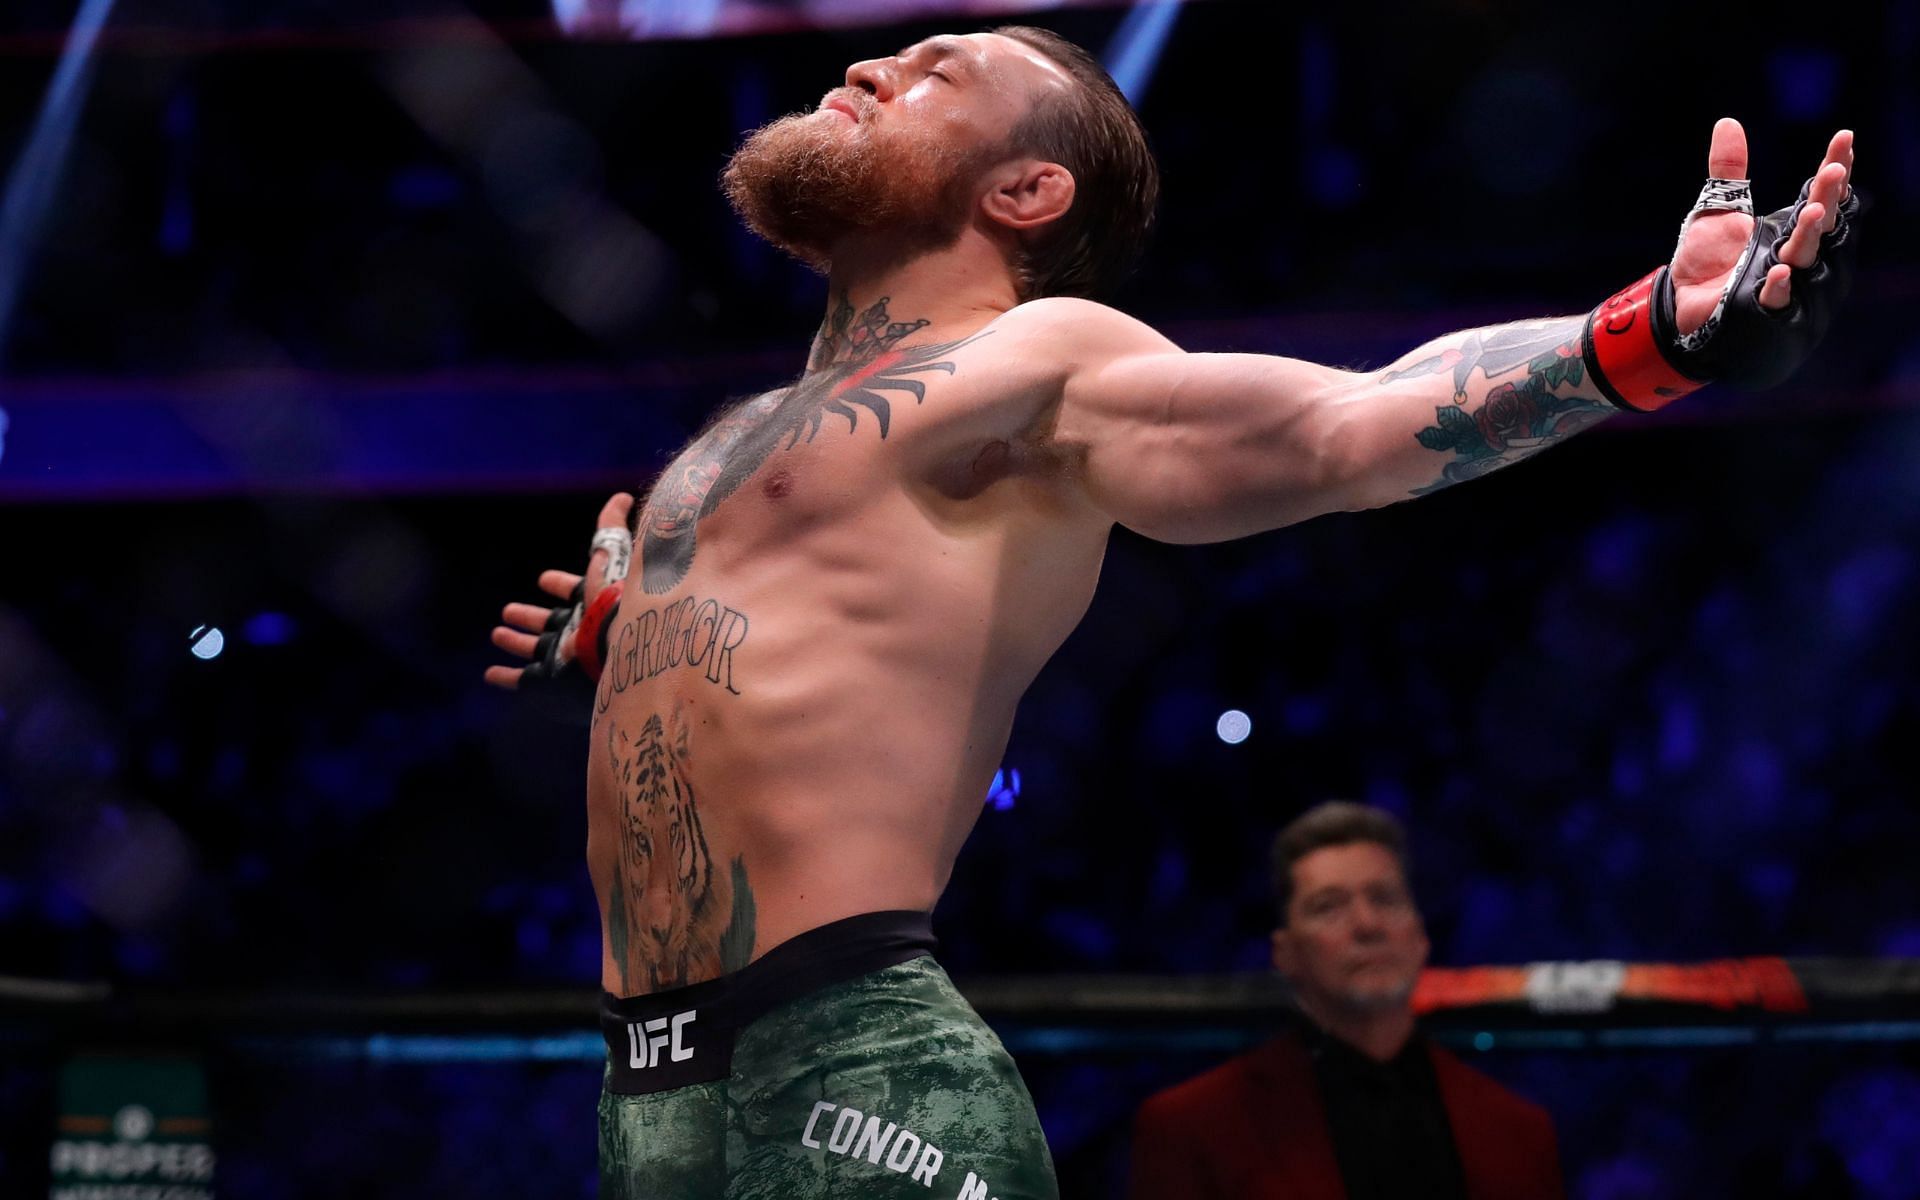 Combat sports icon and UFC mainstay Conor McGregor